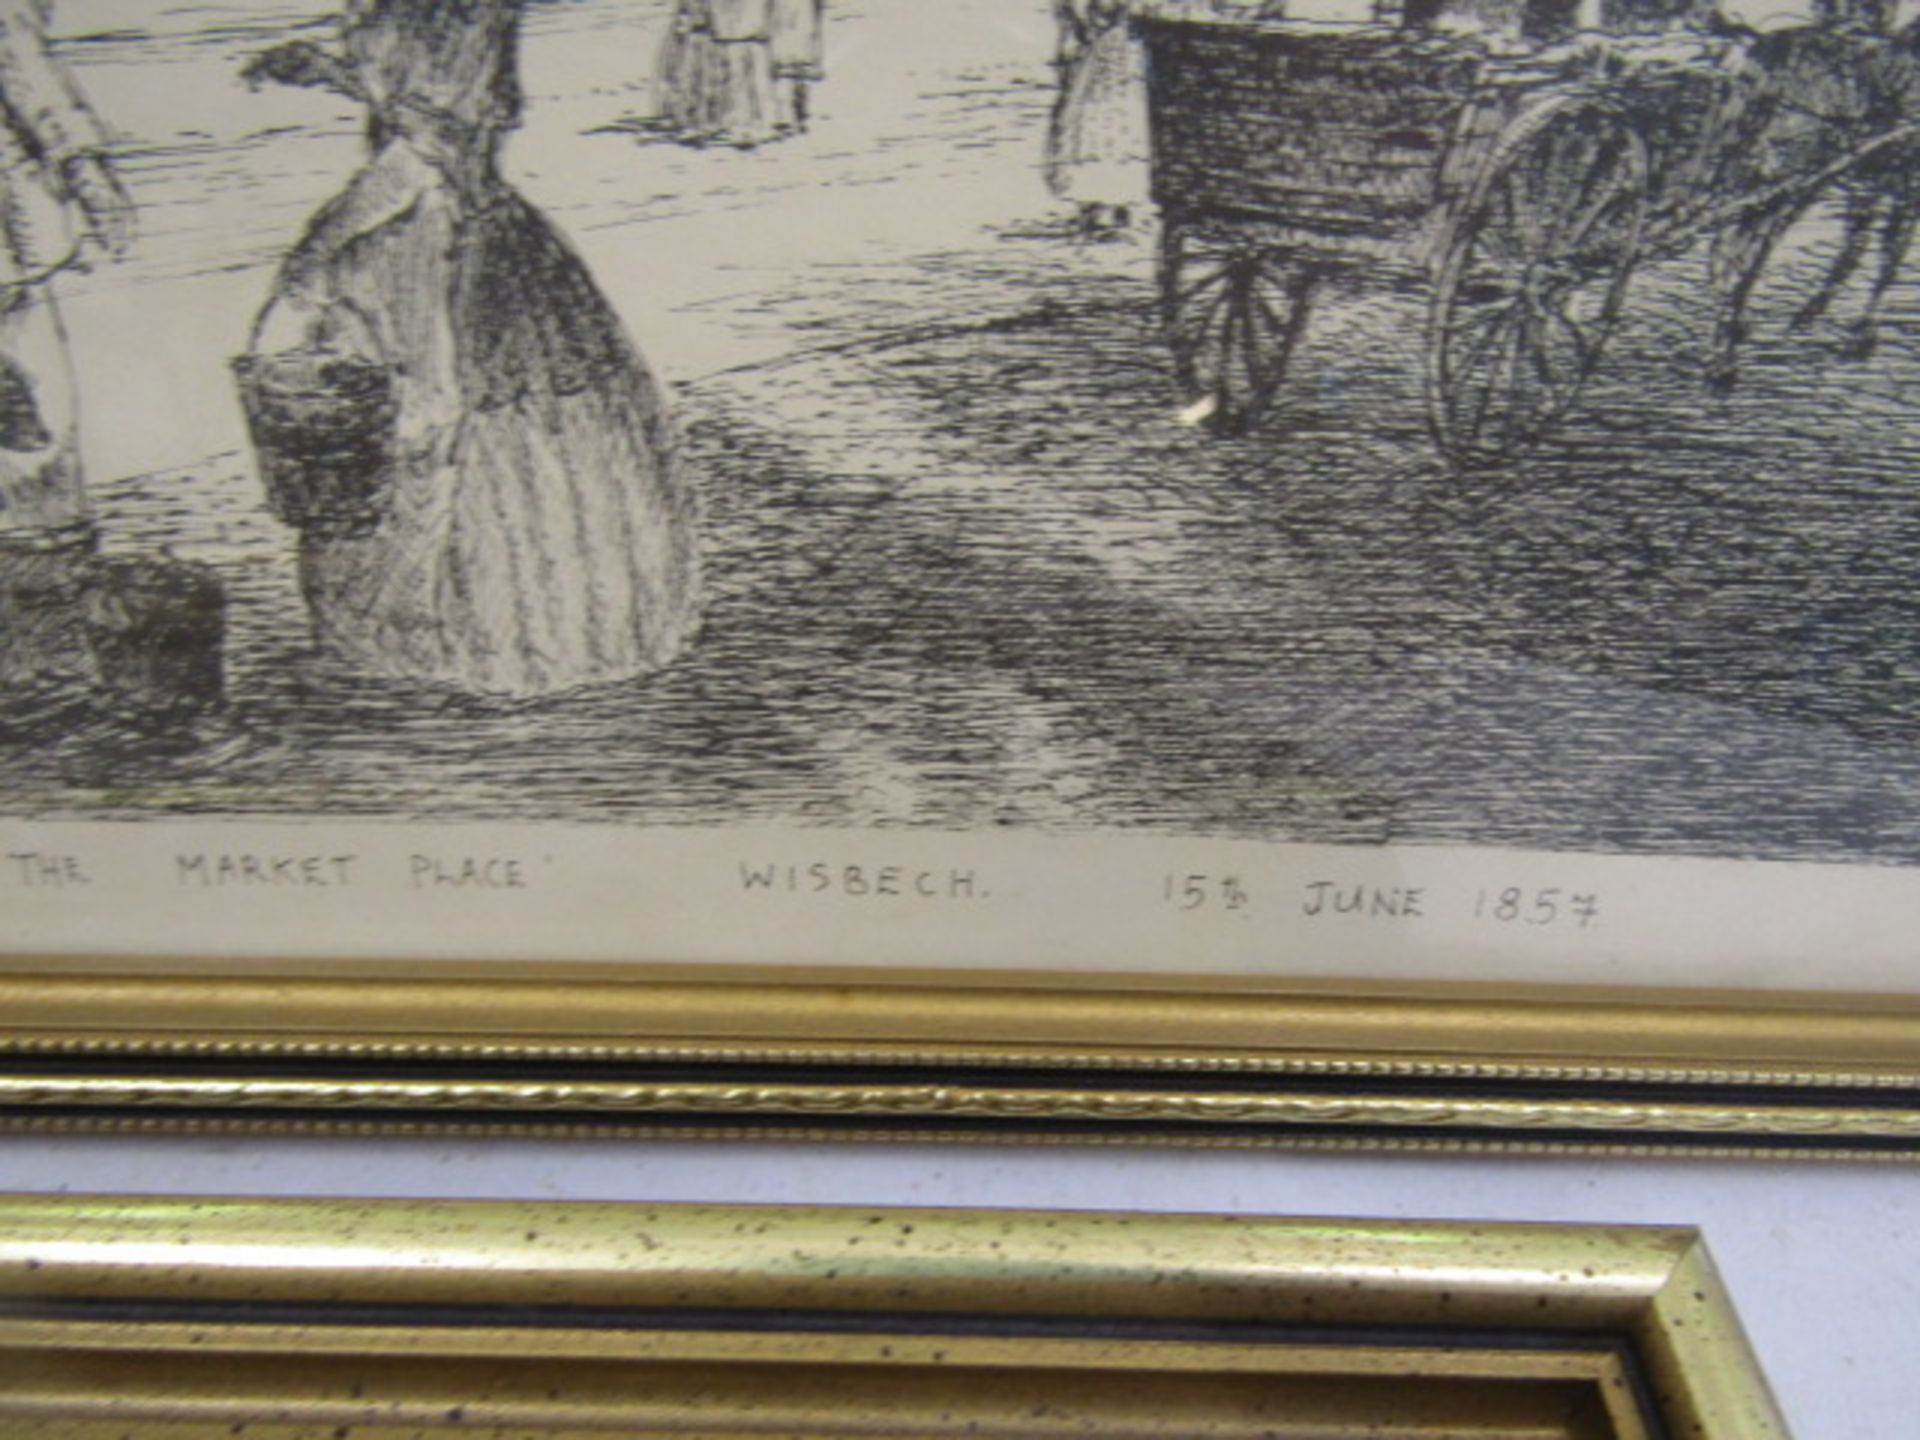 Wisbech etchings plus a few pictures - Image 4 of 13